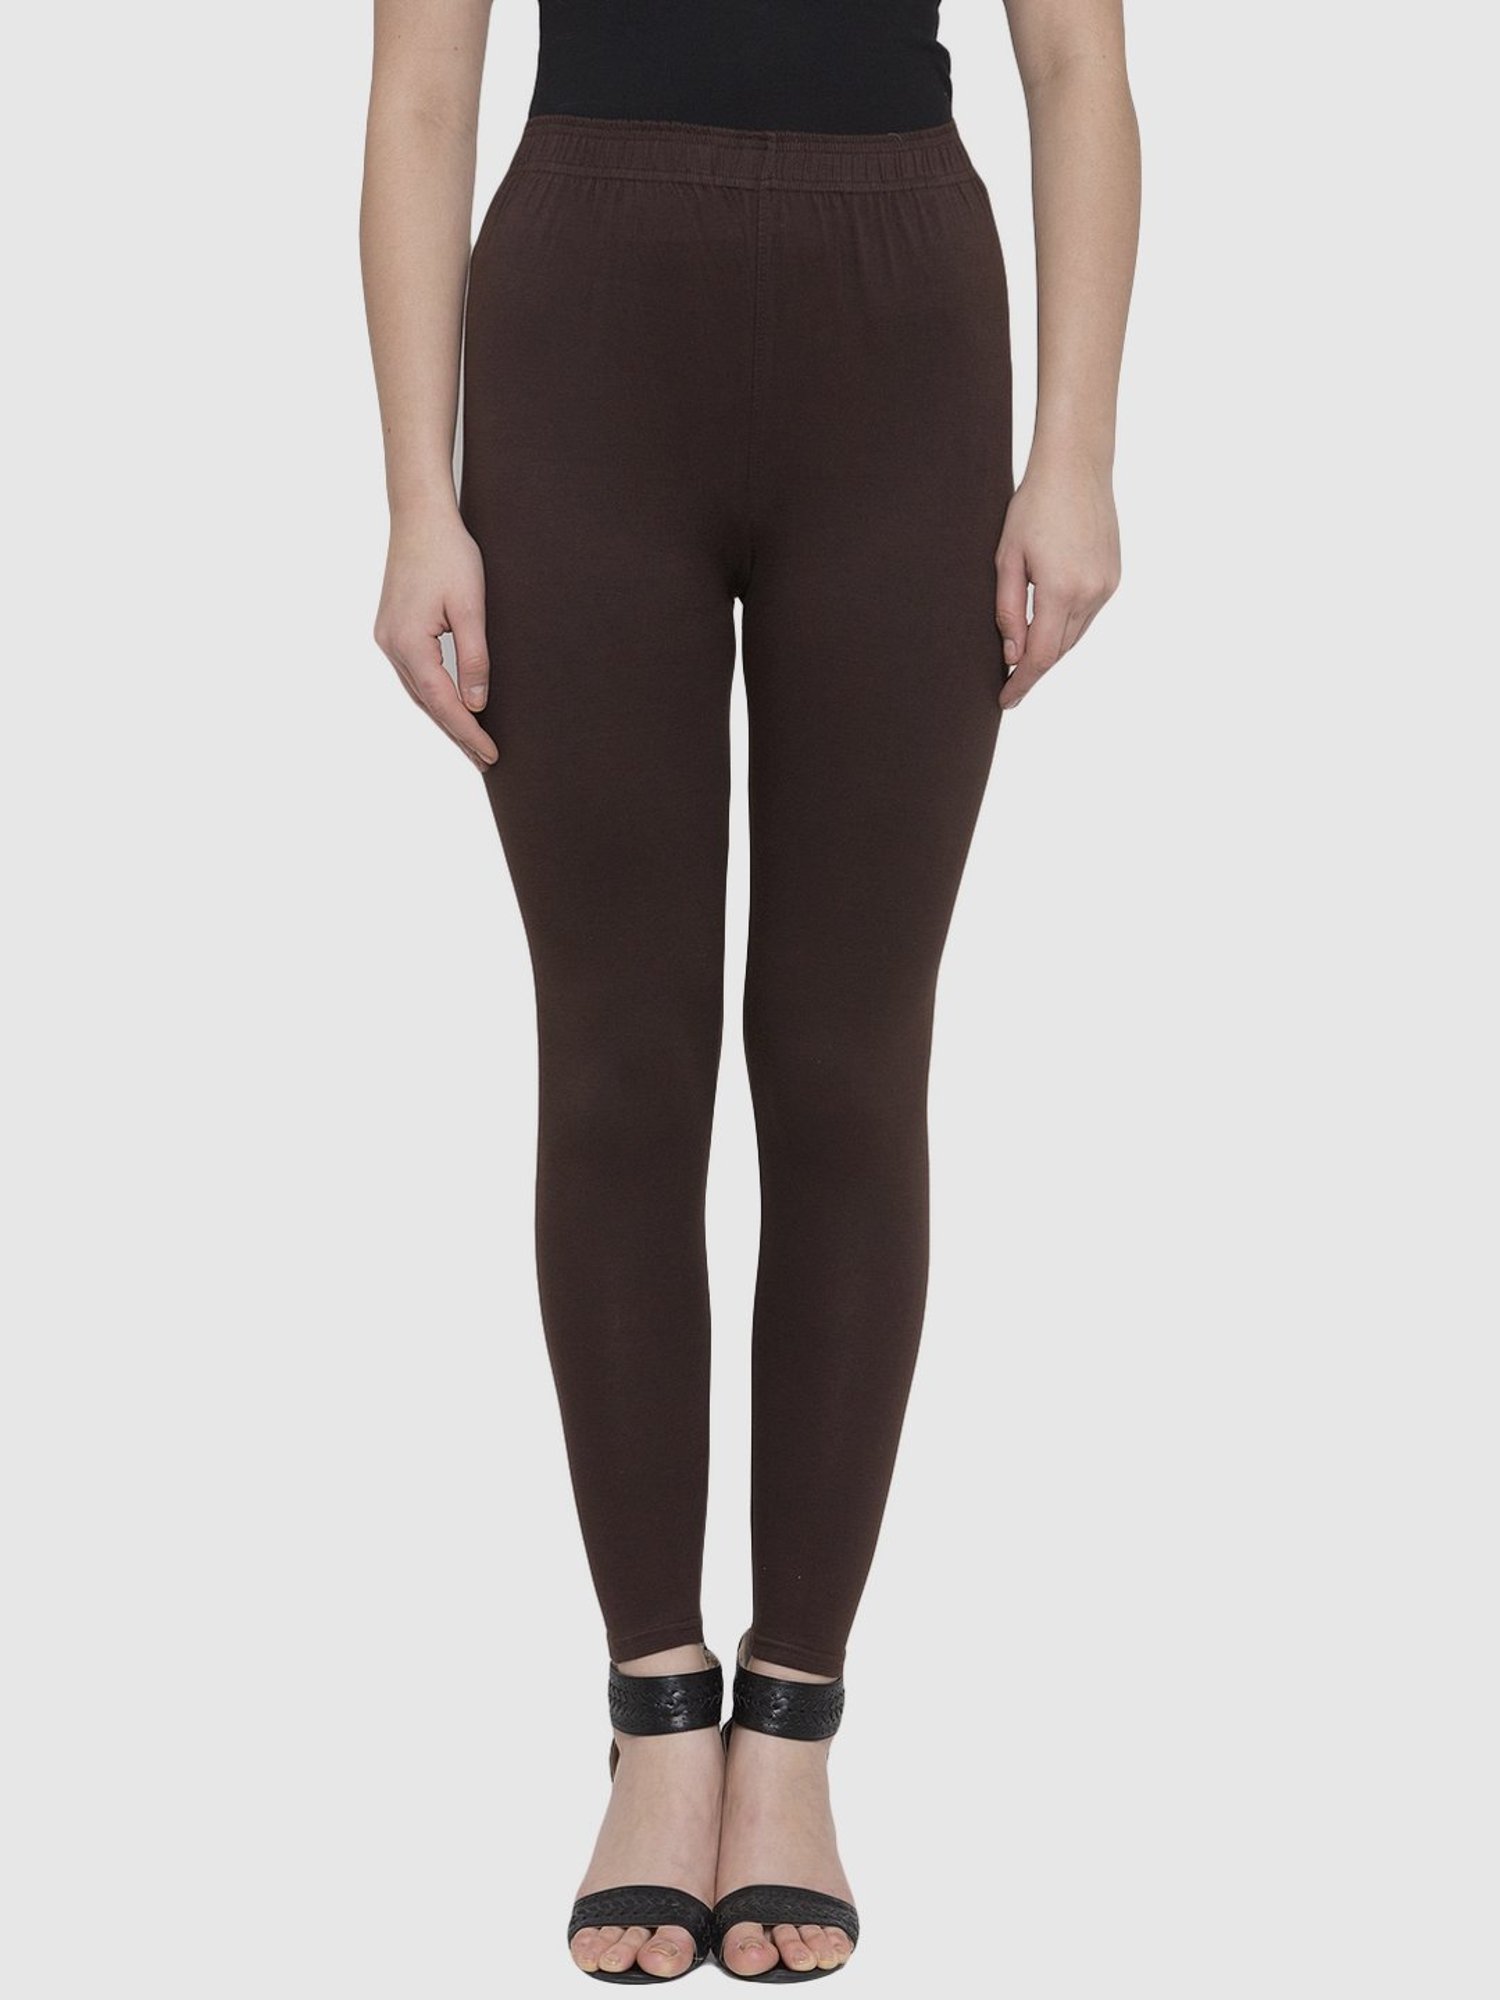 Brown Ribbed Waistband Cotton Leggings